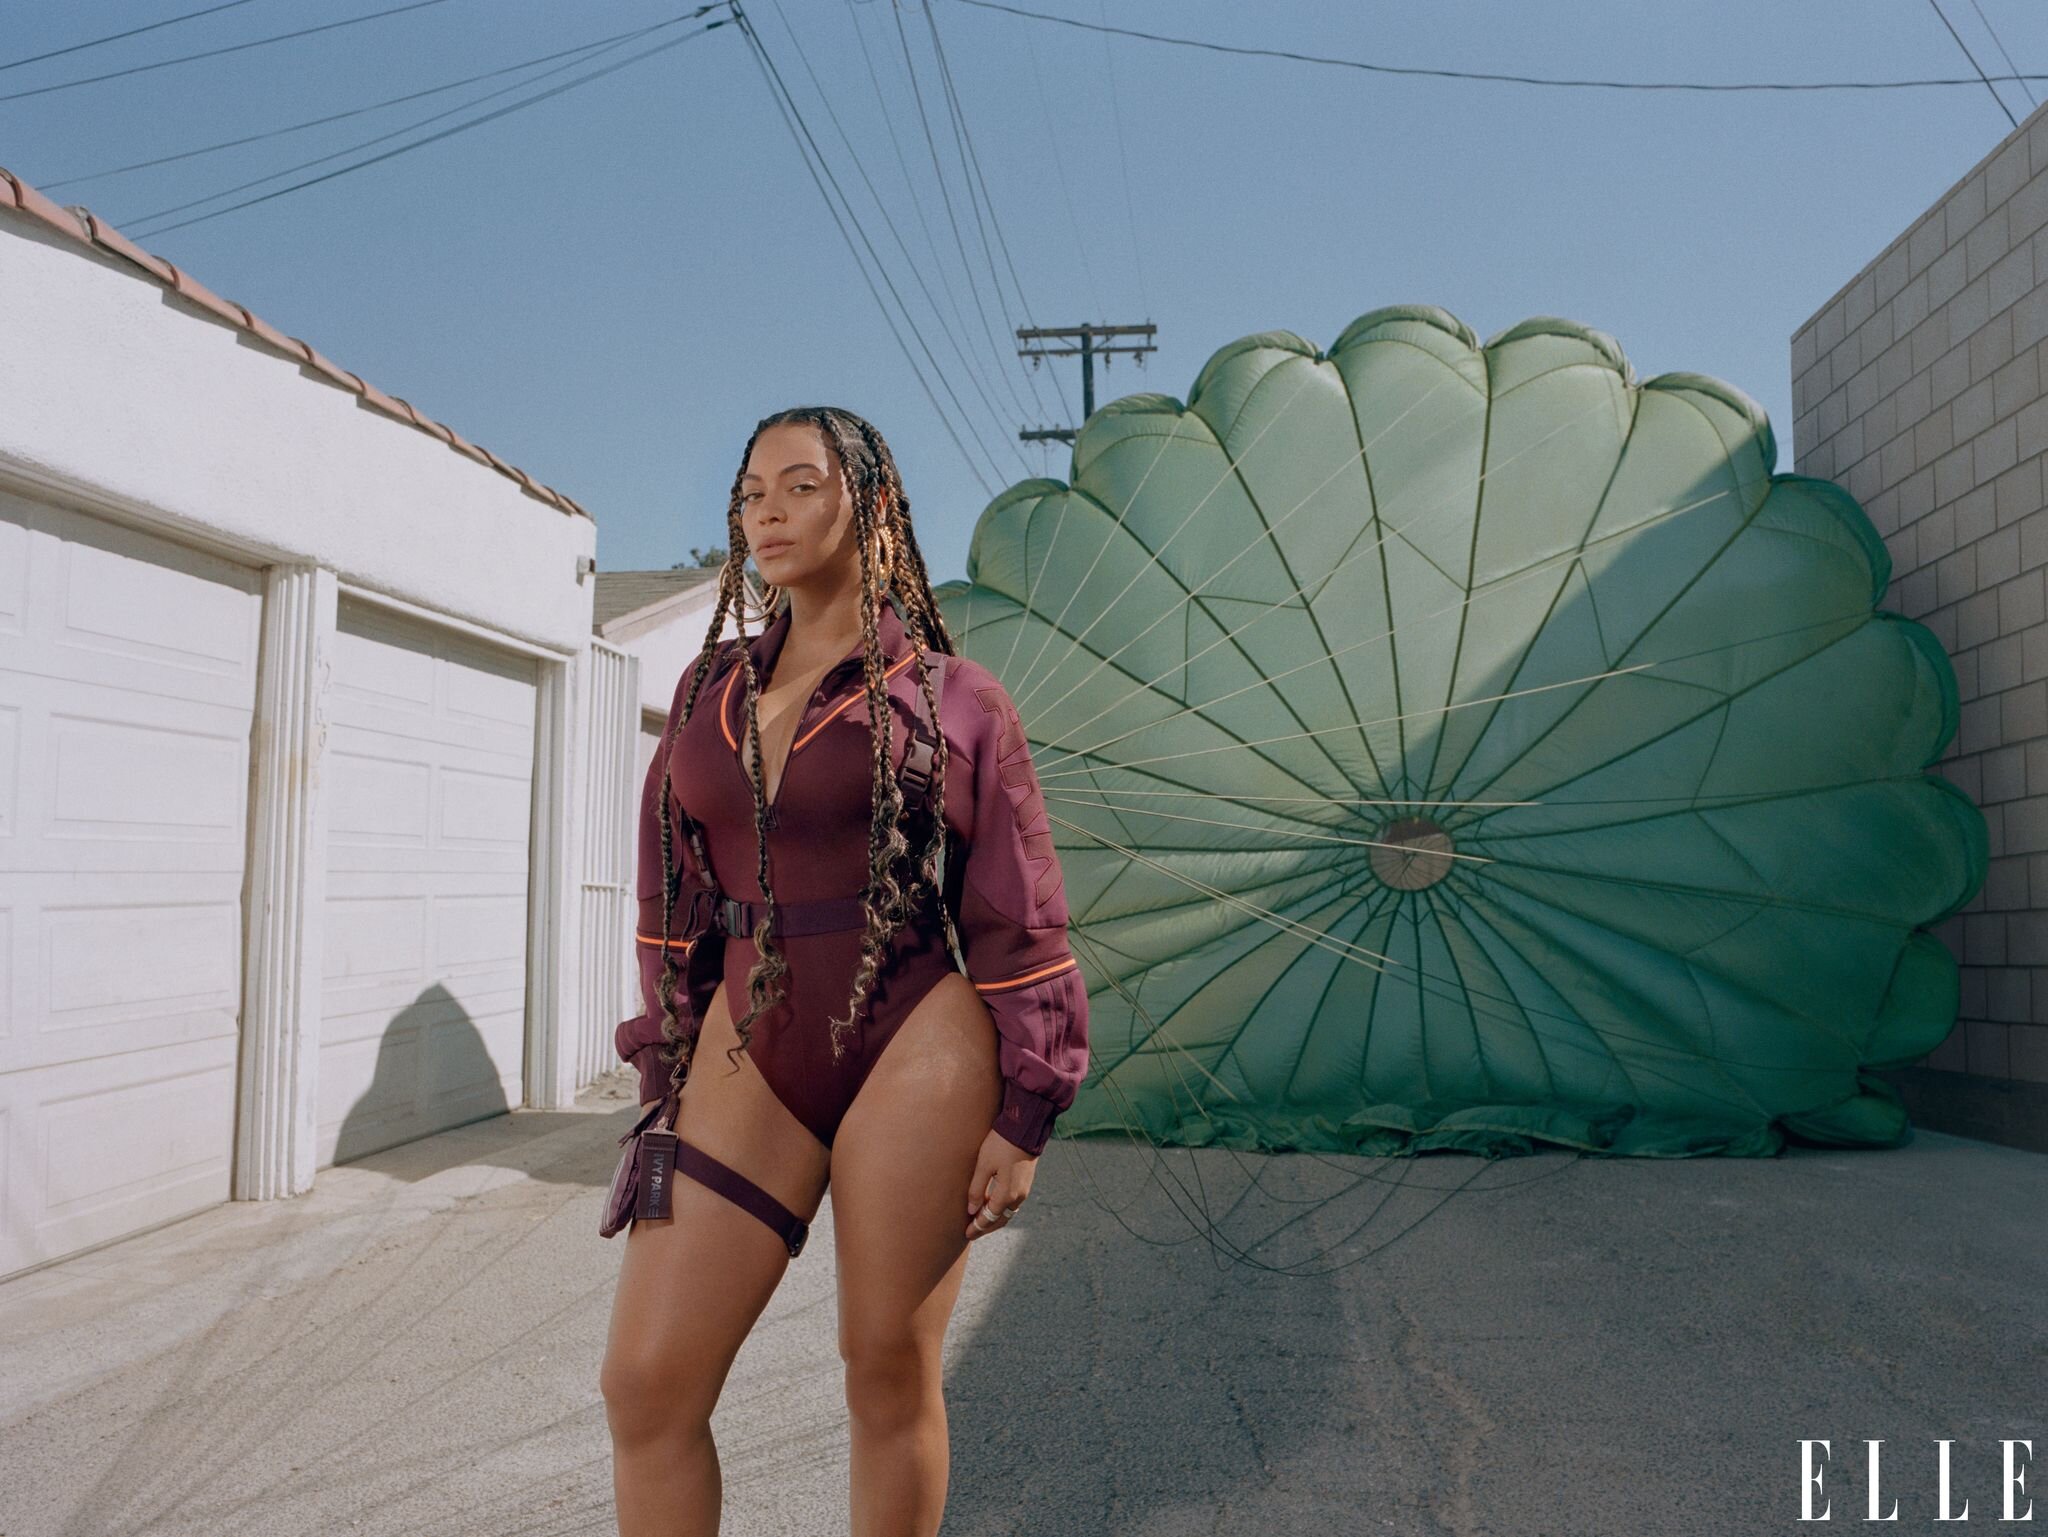  Track top bodysuit, harness bag, both, IVY PARK x adidas. Hoop earrings, Lana Jewelry. Rings, Ofira. Beyonce by Melina Matsoukas for ELLE US January, 2020. 